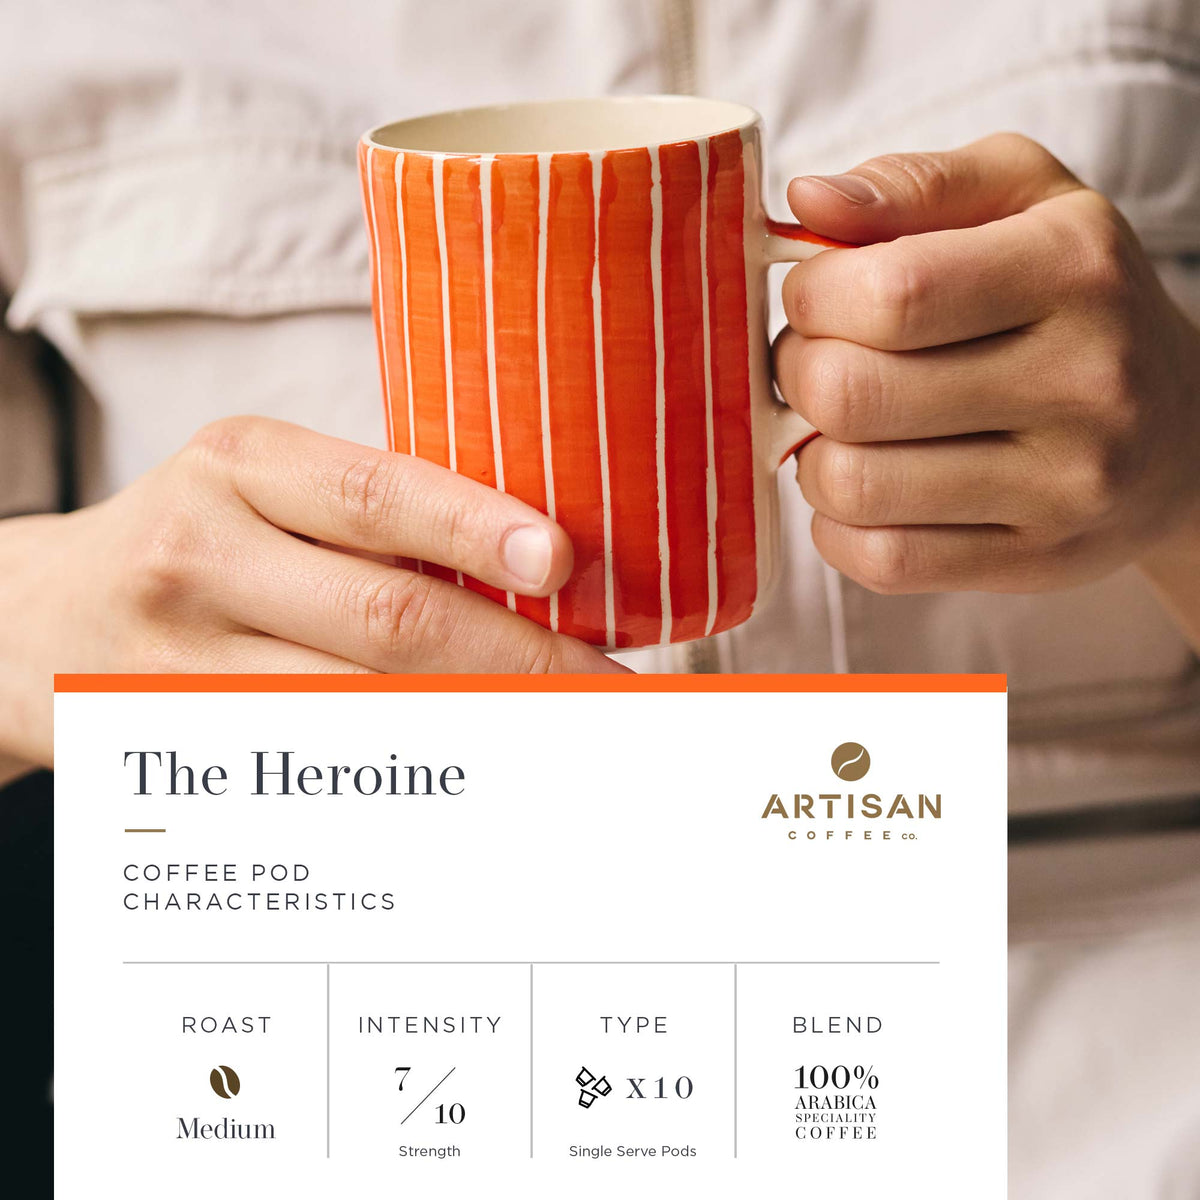 Artisan Coffee Co The Heroine Pods Infographic Characteristics